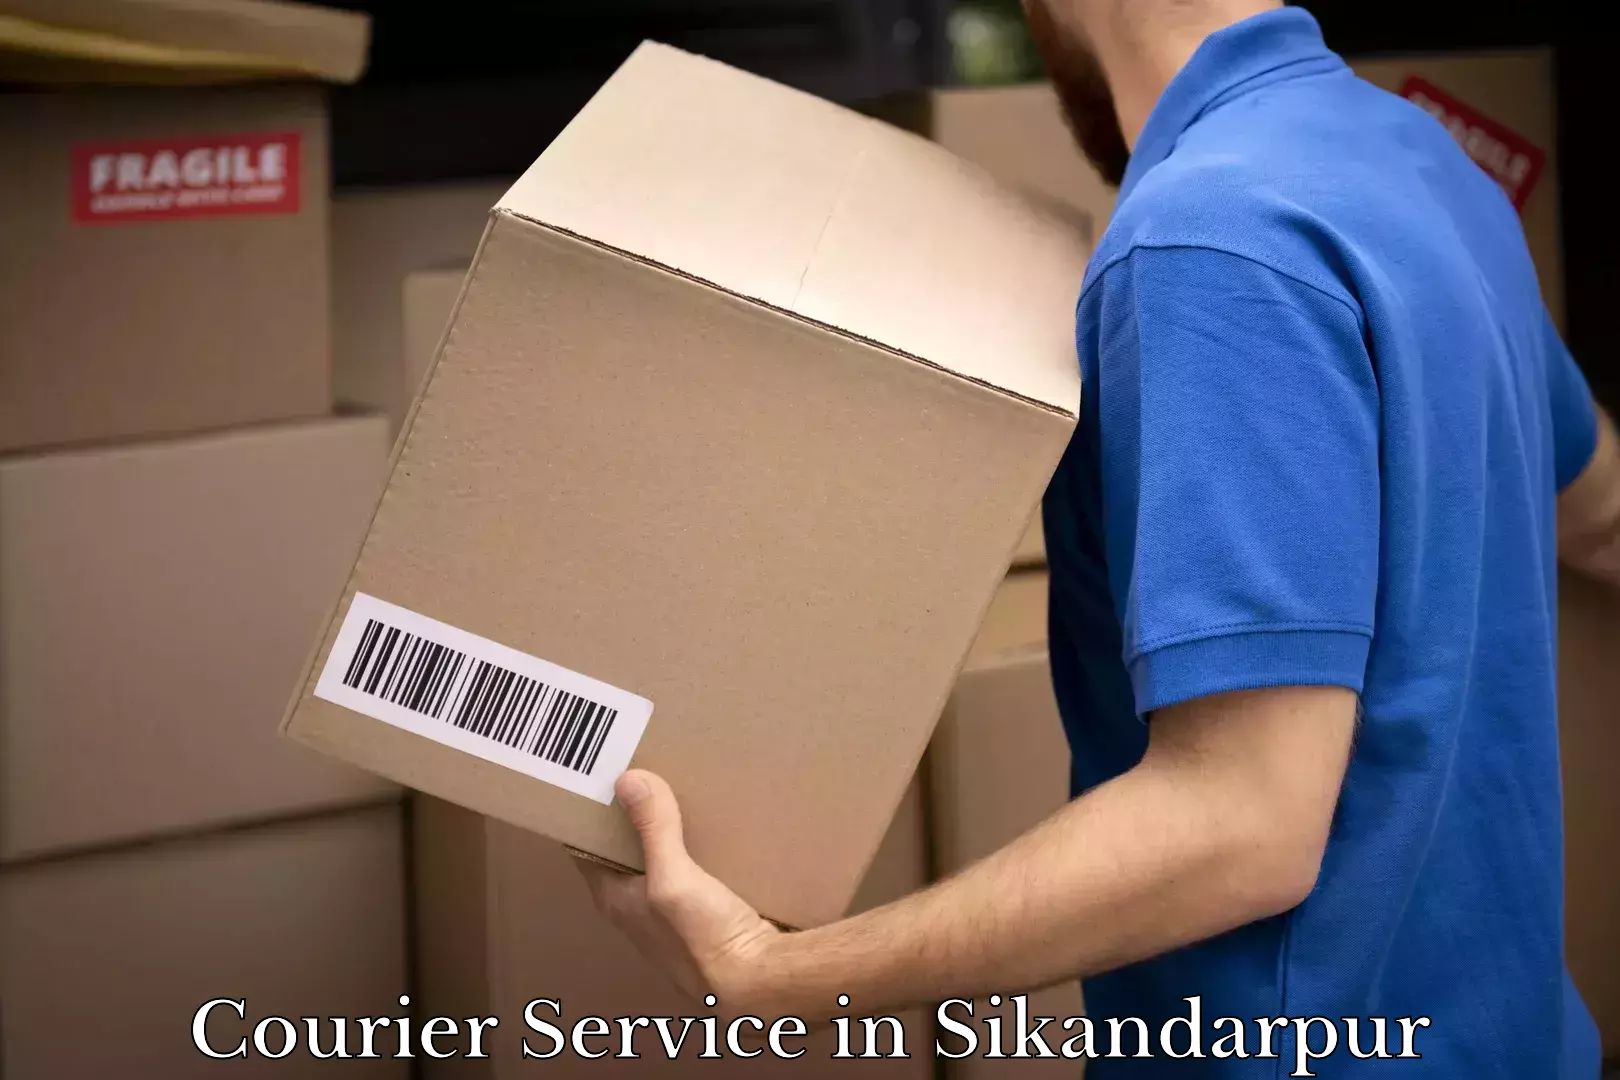 Parcel delivery in Sikandarpur